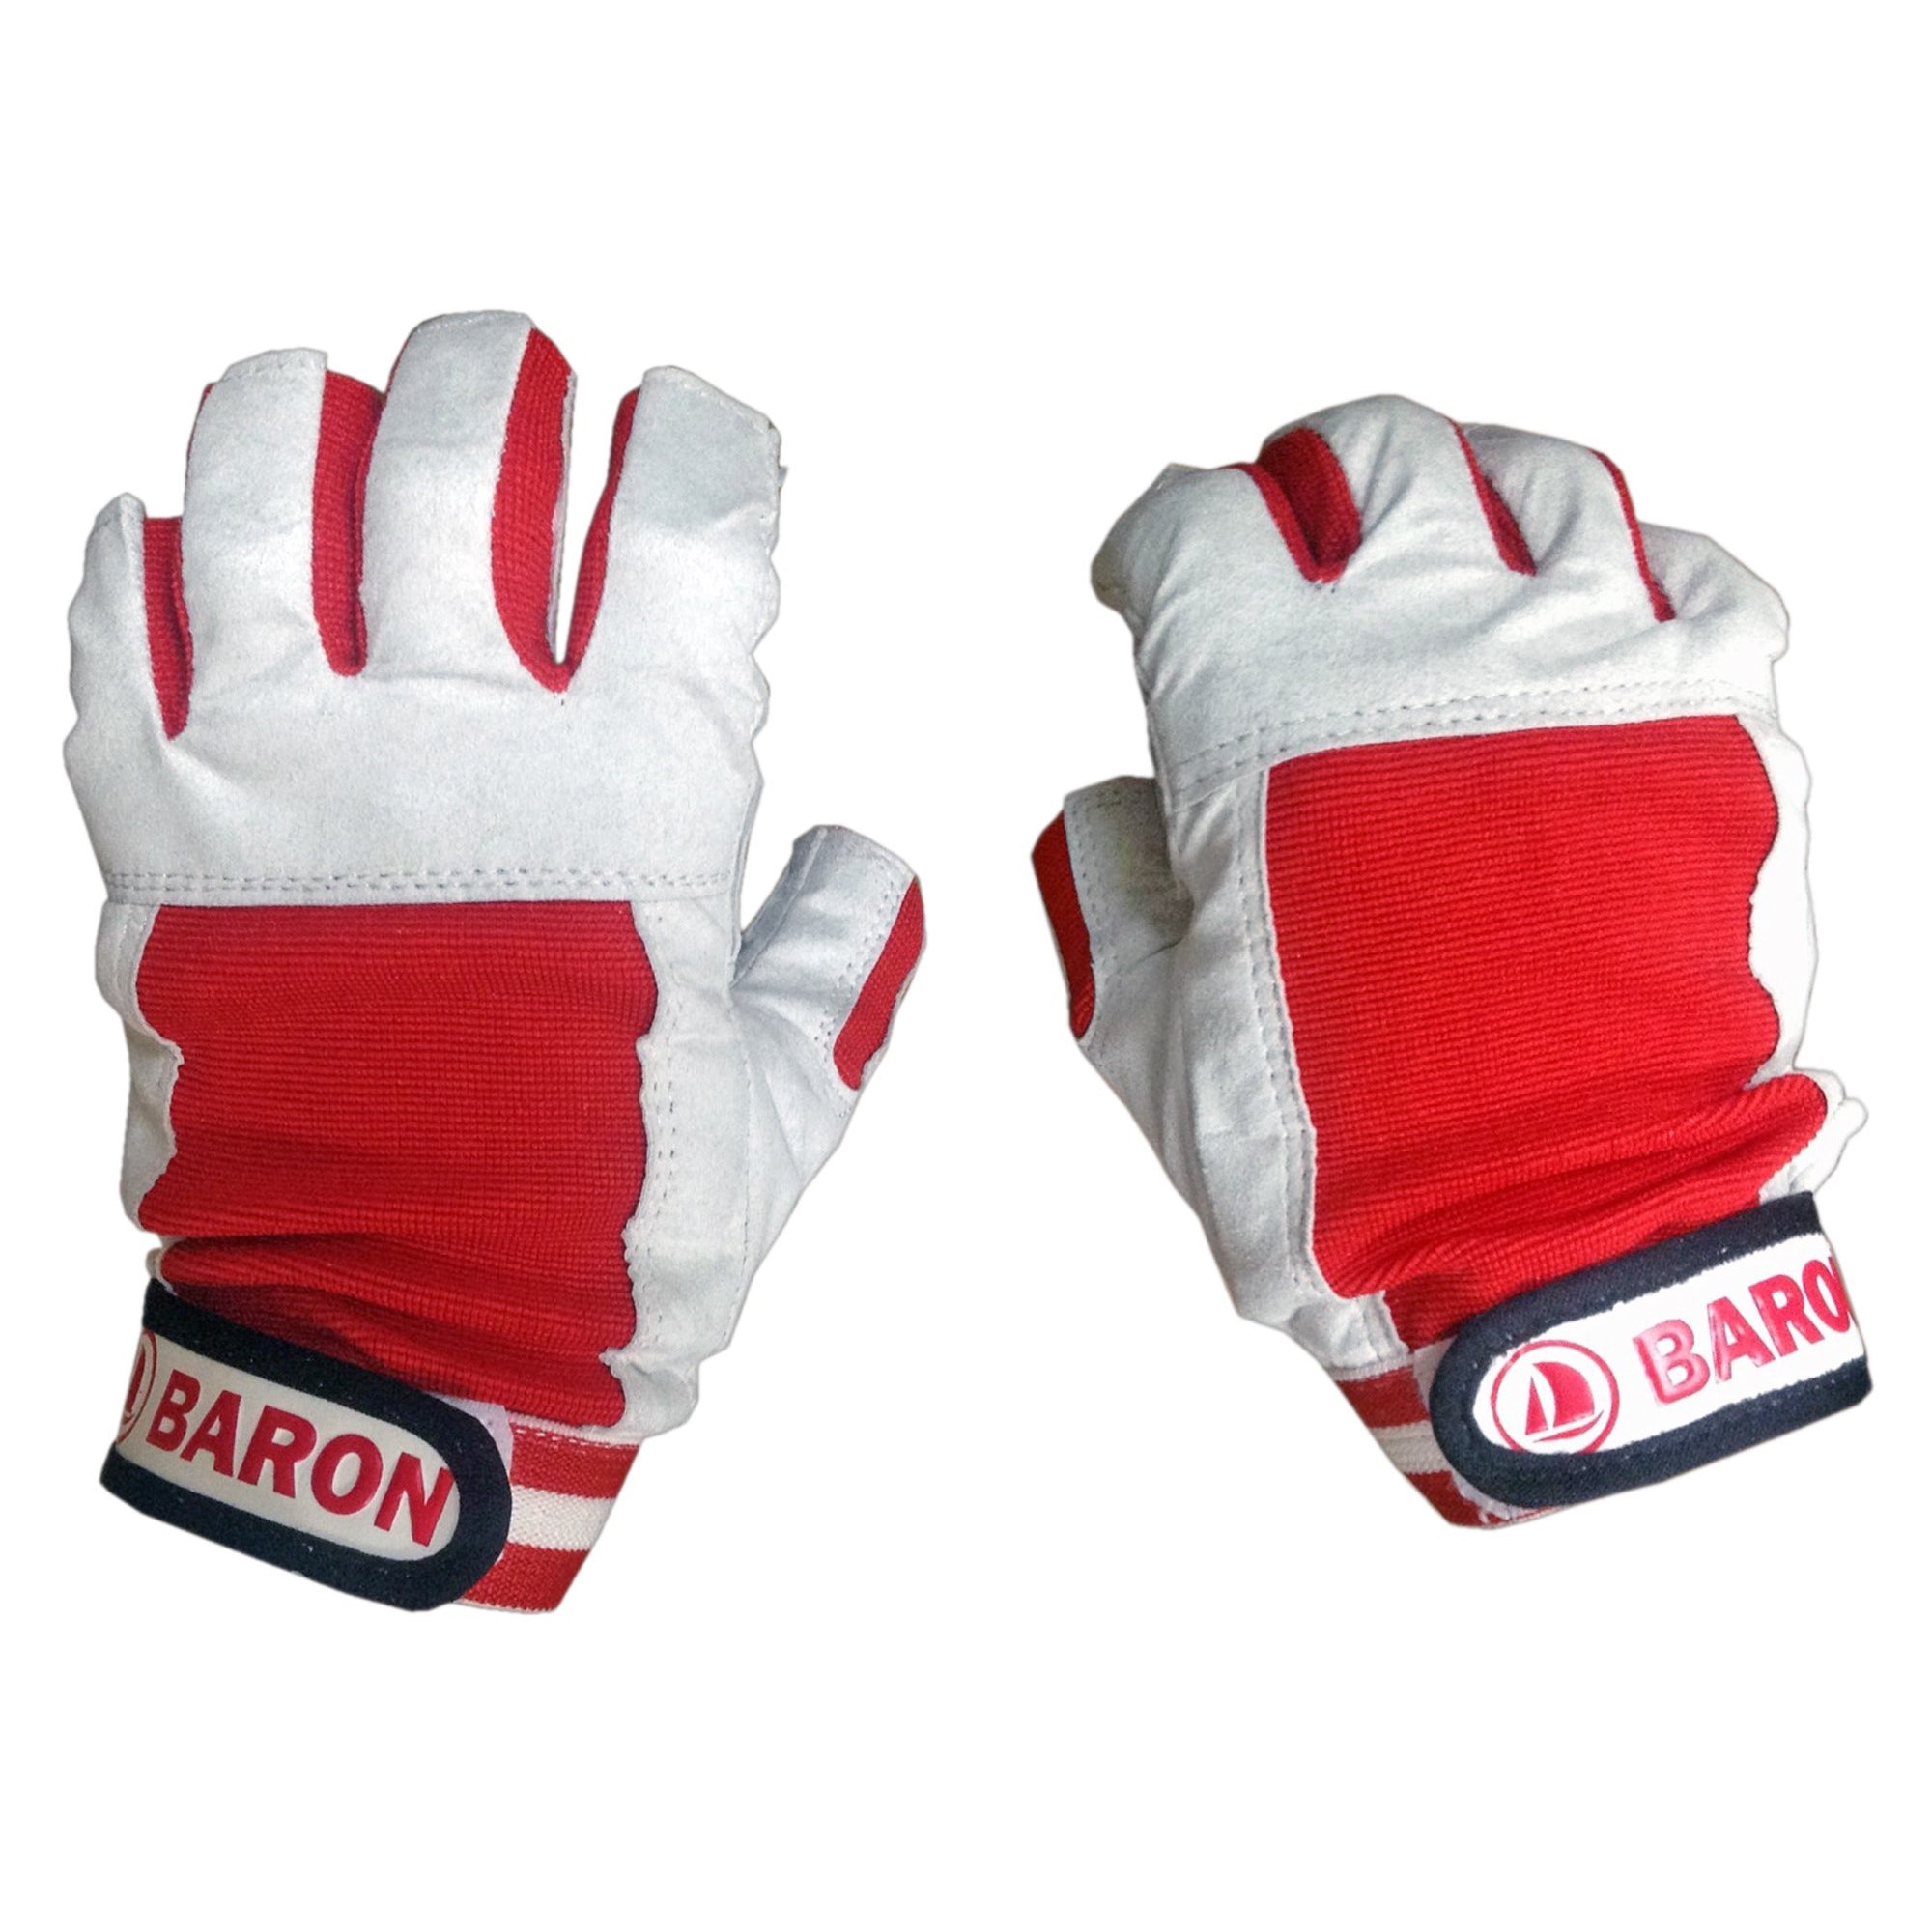 Multi-Purpose Utility Gloves with Adjustable Wrists, Red  XXS FO1617